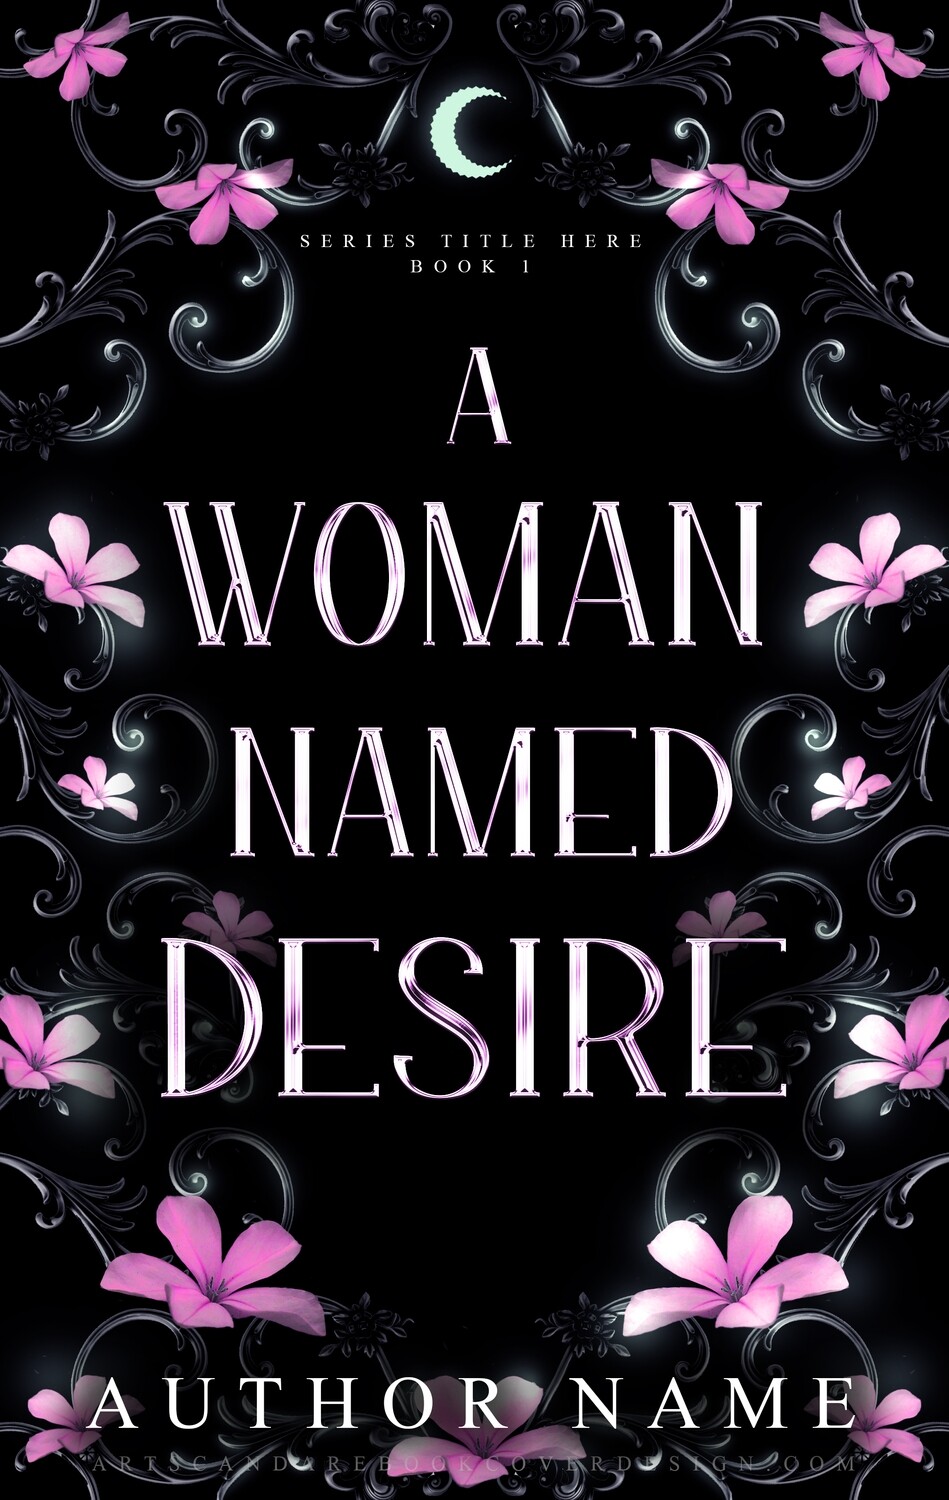 A WOMAN NAMED DESIRE